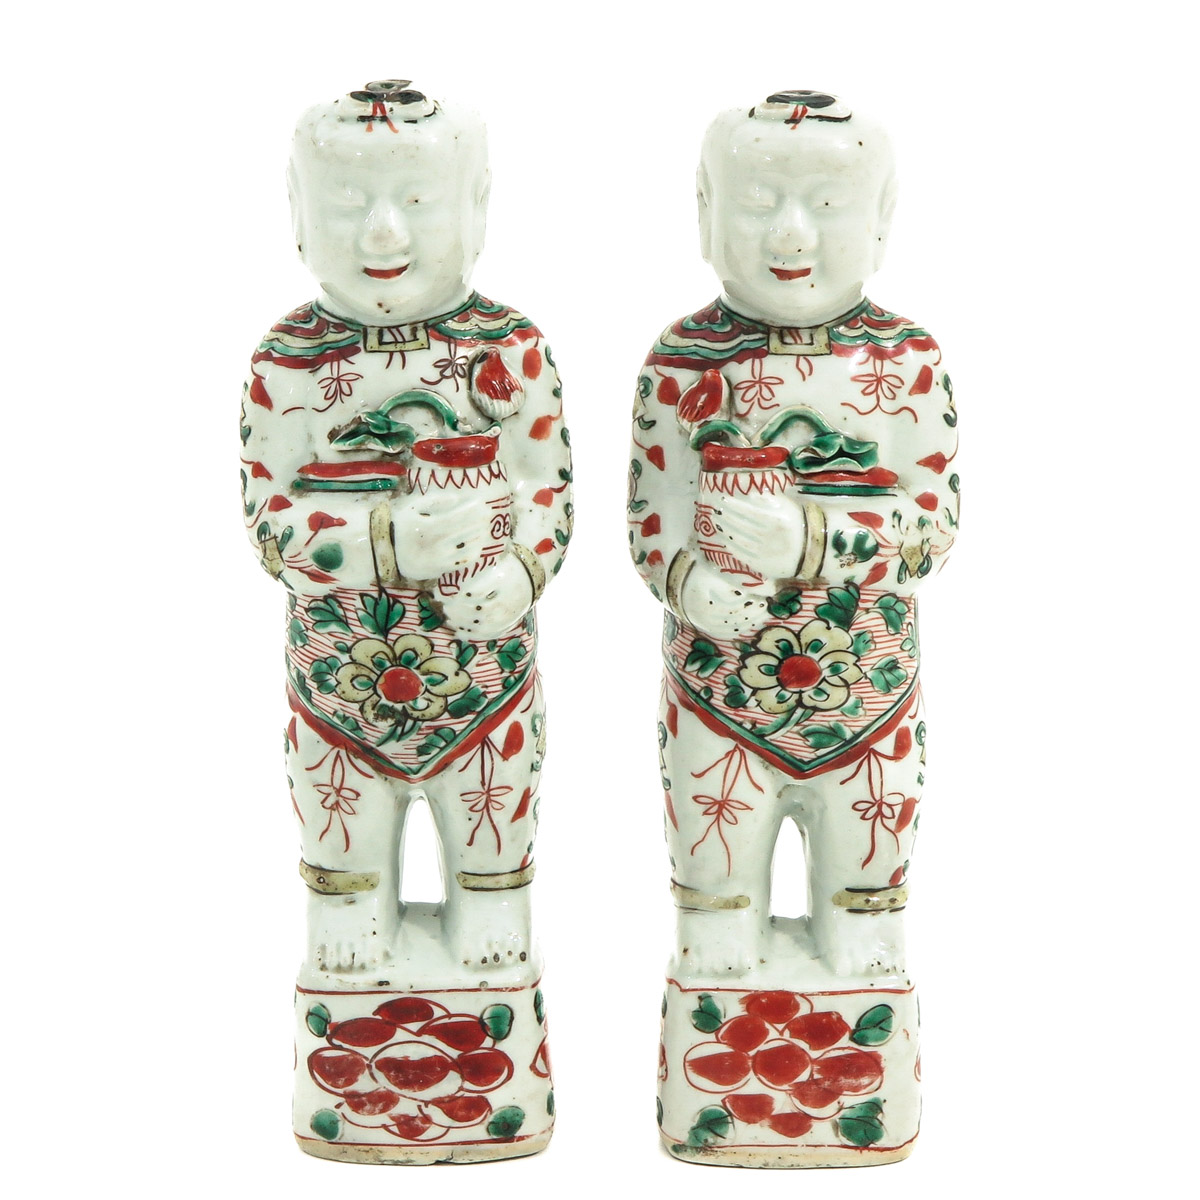 A Pair of Chinese Boy Sculptures